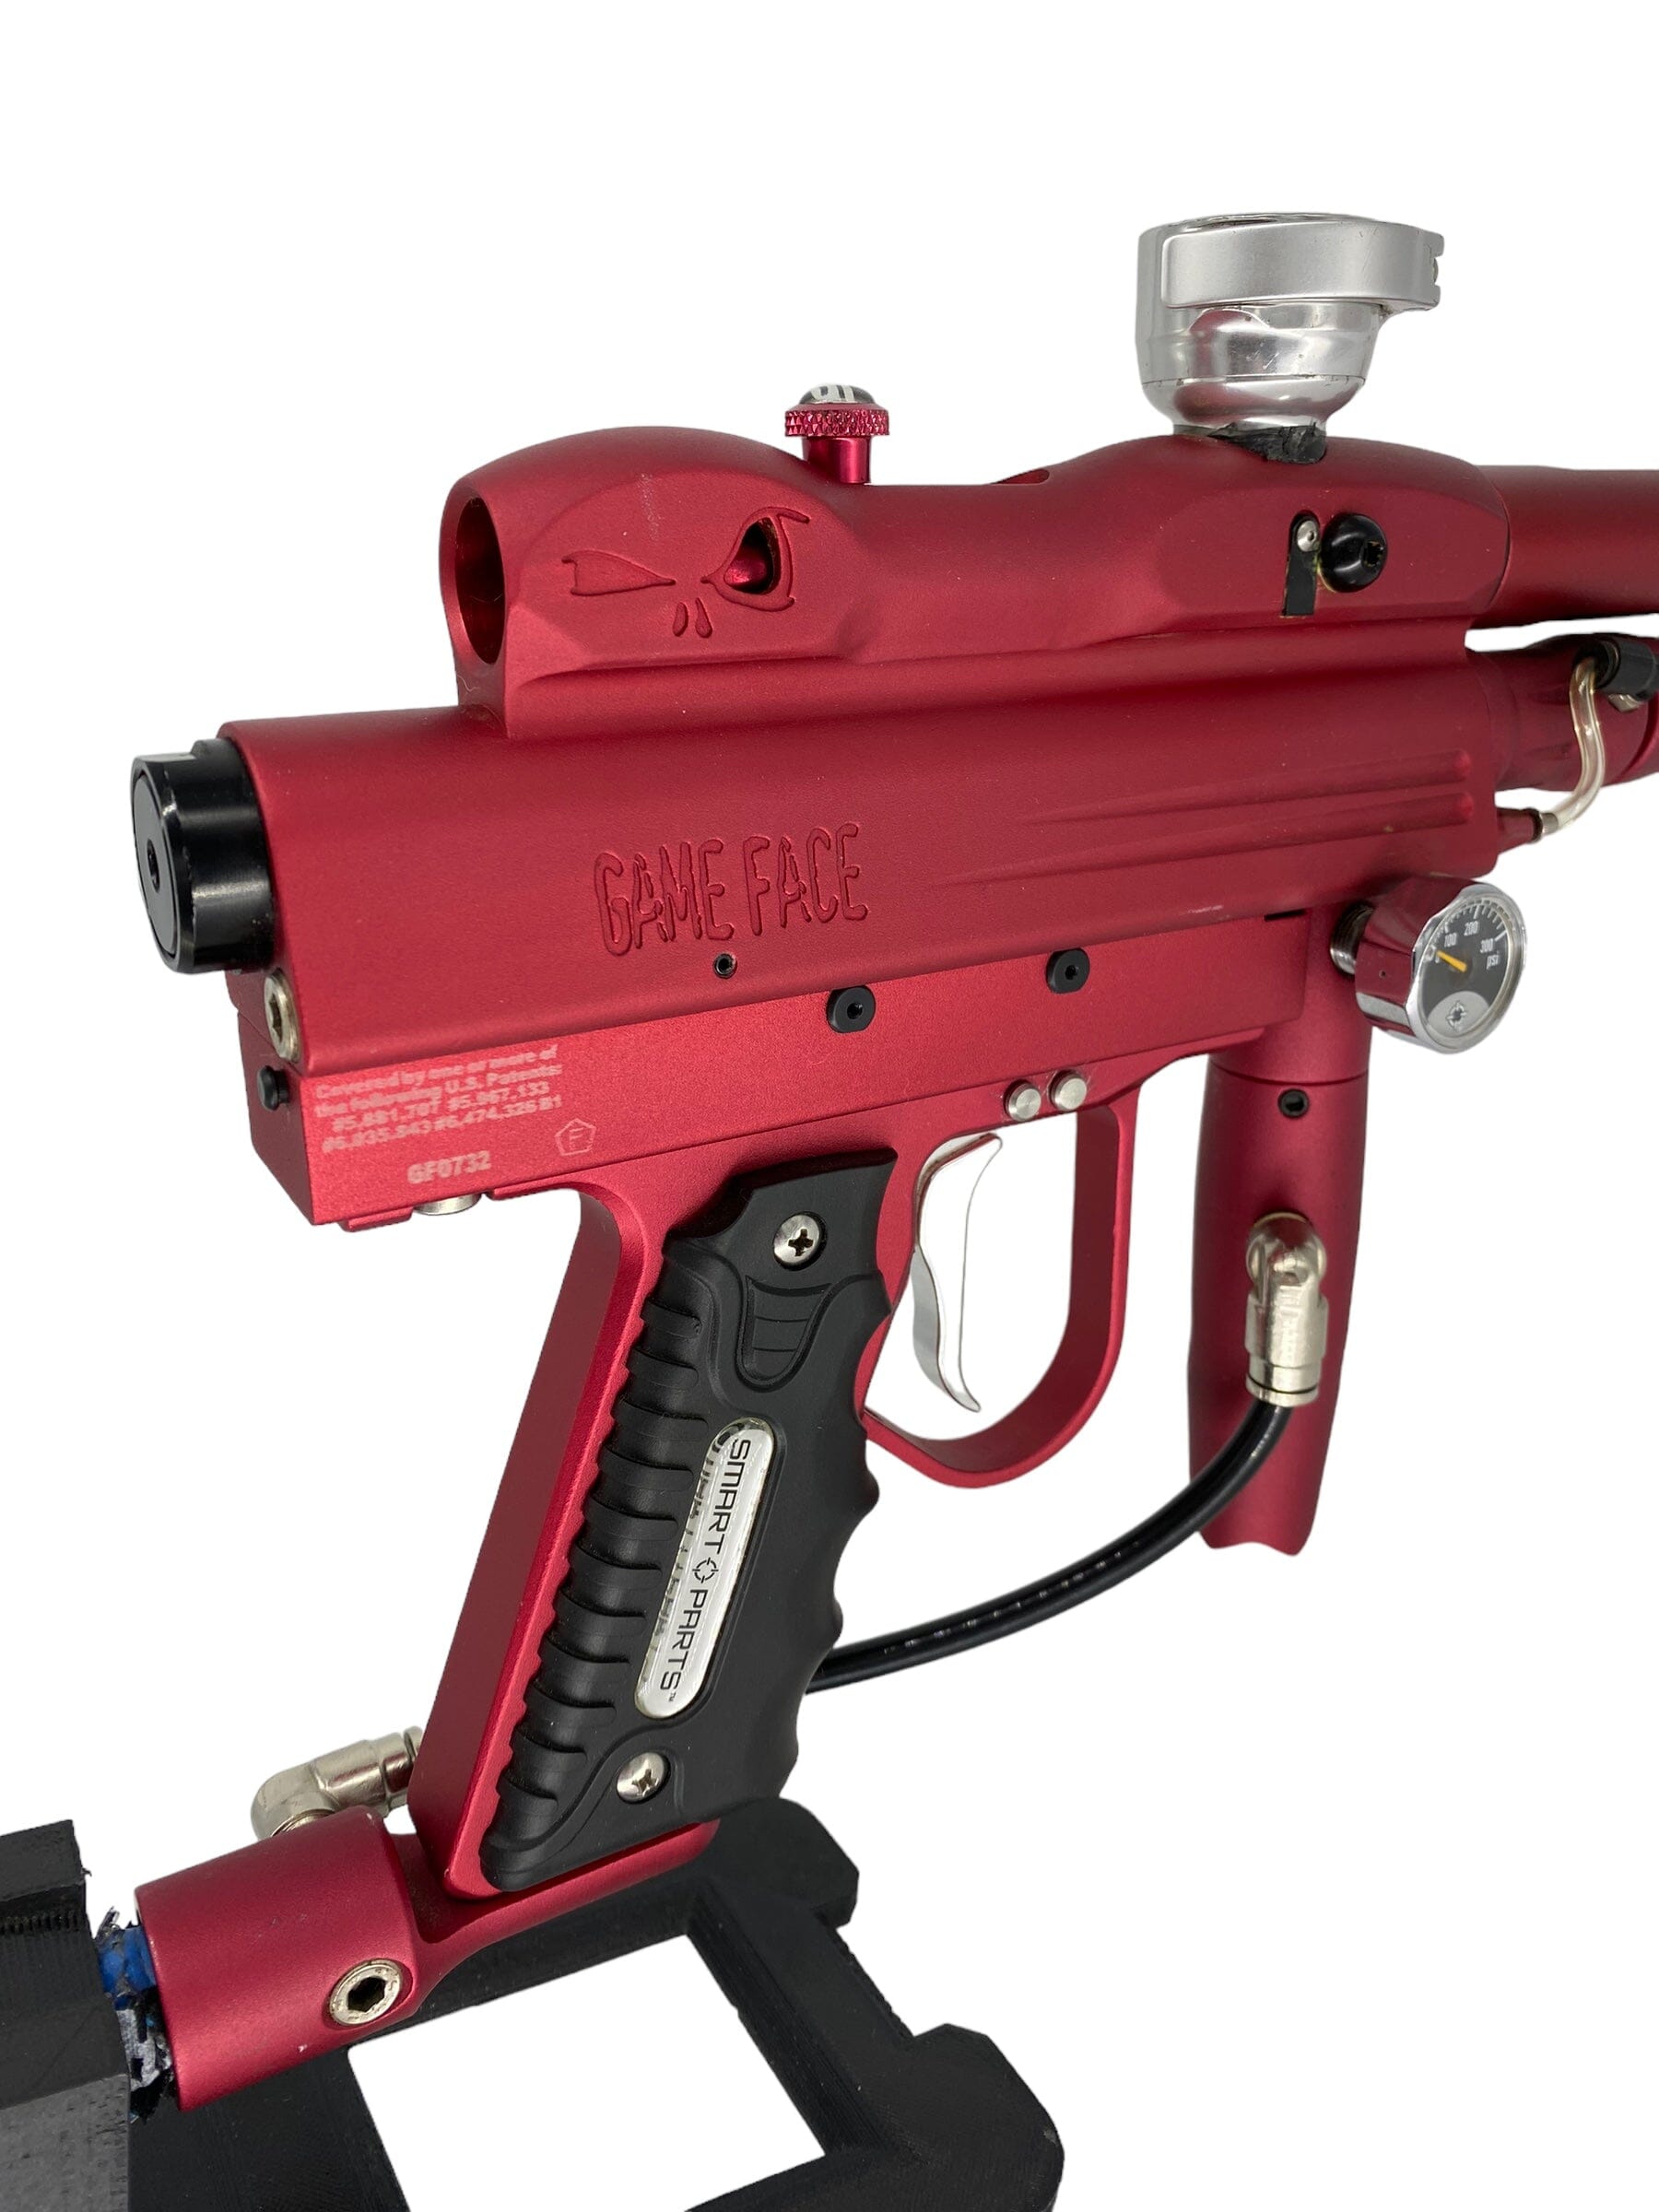 Used Game Face Impulse Paintball Gun Paintball Gun from CPXBrosPaintball Buy/Sell/Trade Paintball Markers, New Paintball Guns, Paintball Hoppers, Paintball Masks, and Hormesis Headbands